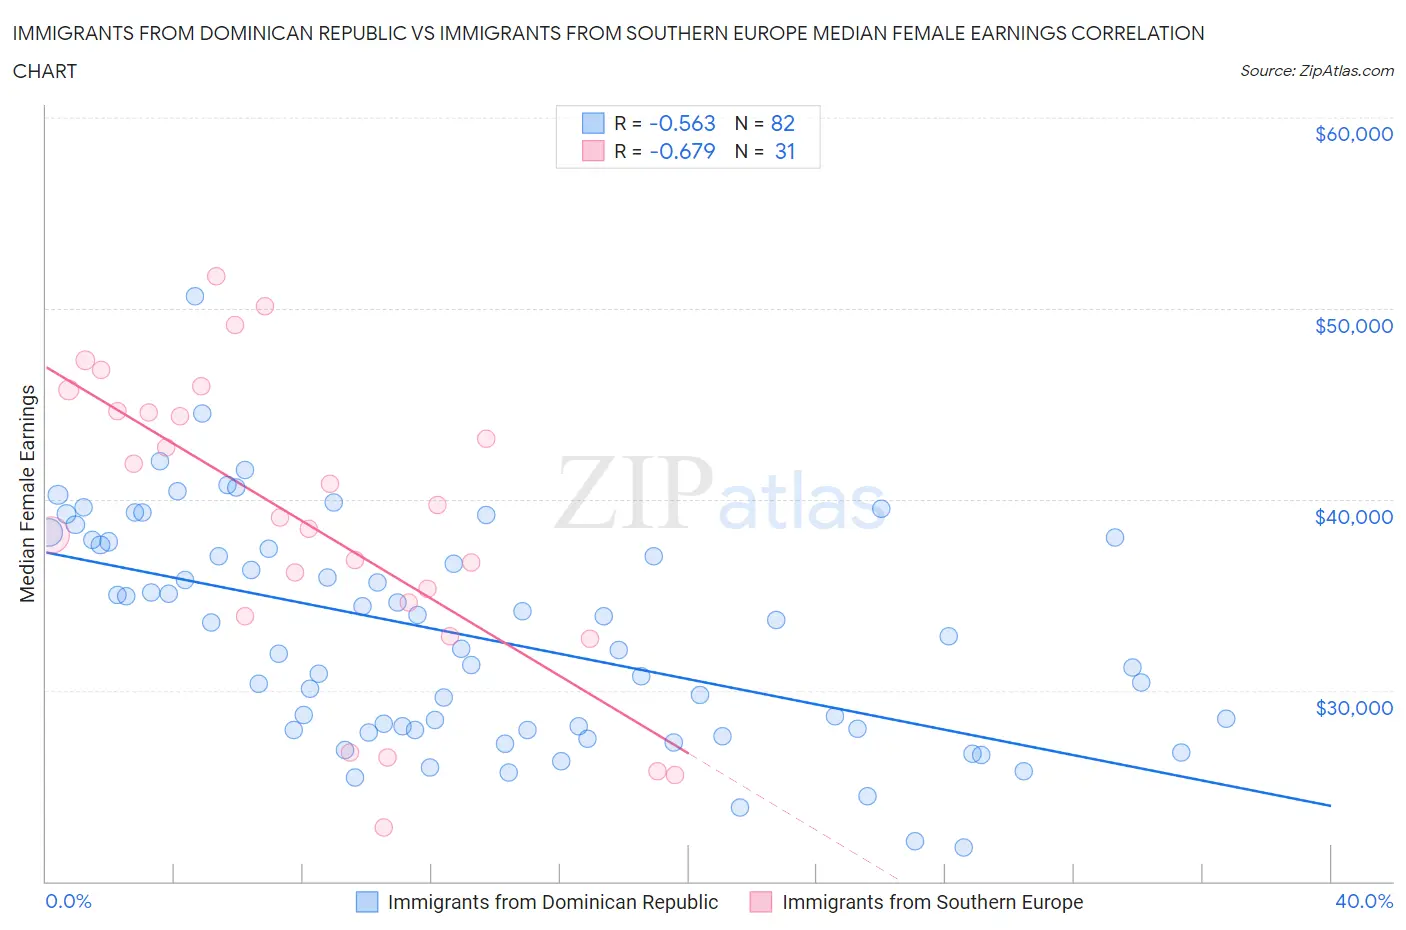 Immigrants from Dominican Republic vs Immigrants from Southern Europe Median Female Earnings